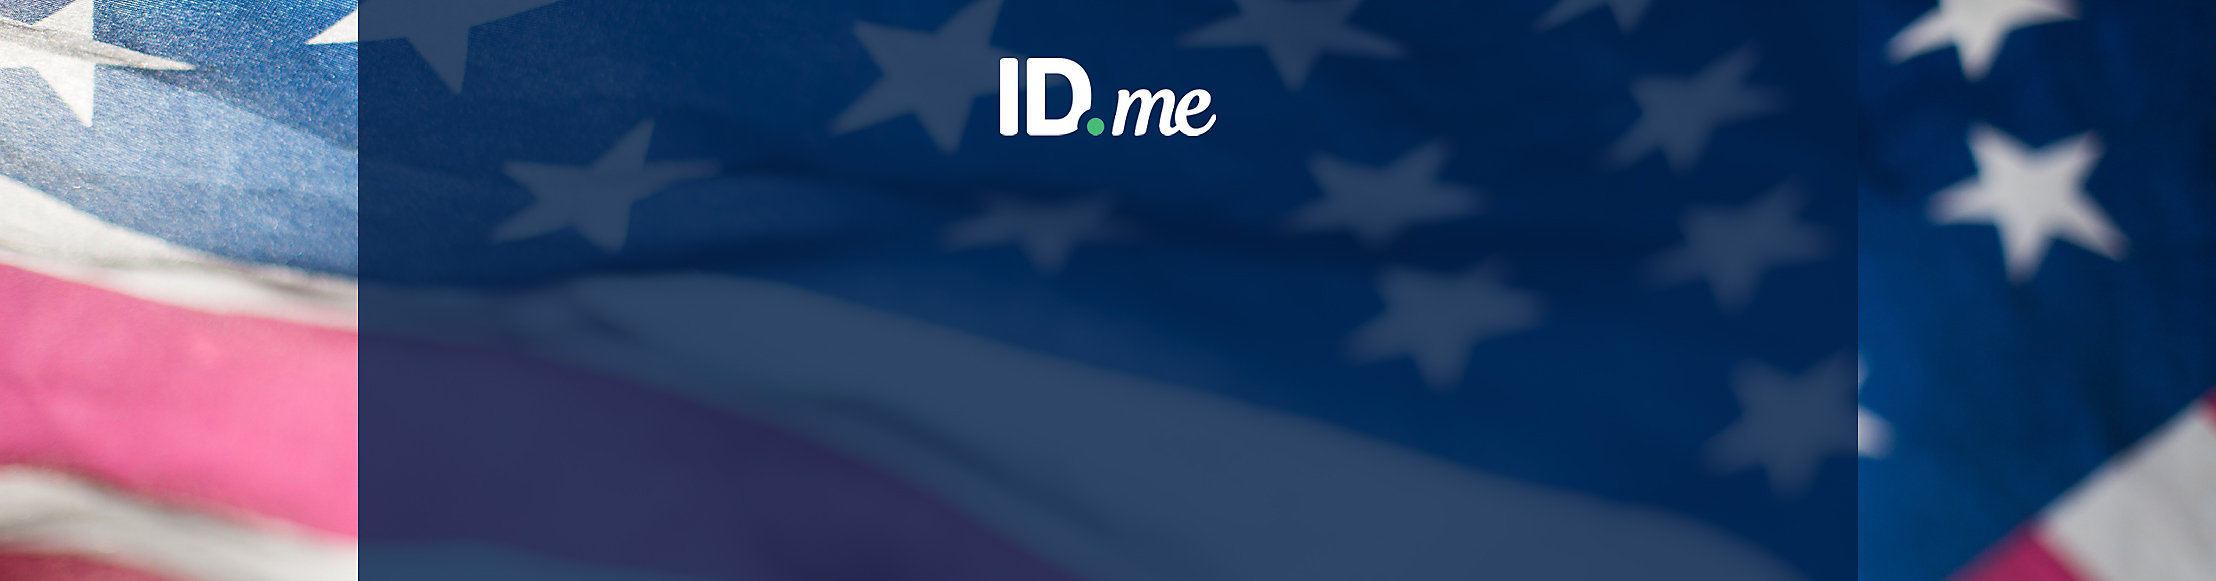 10% Military Discount with ID.Me validation